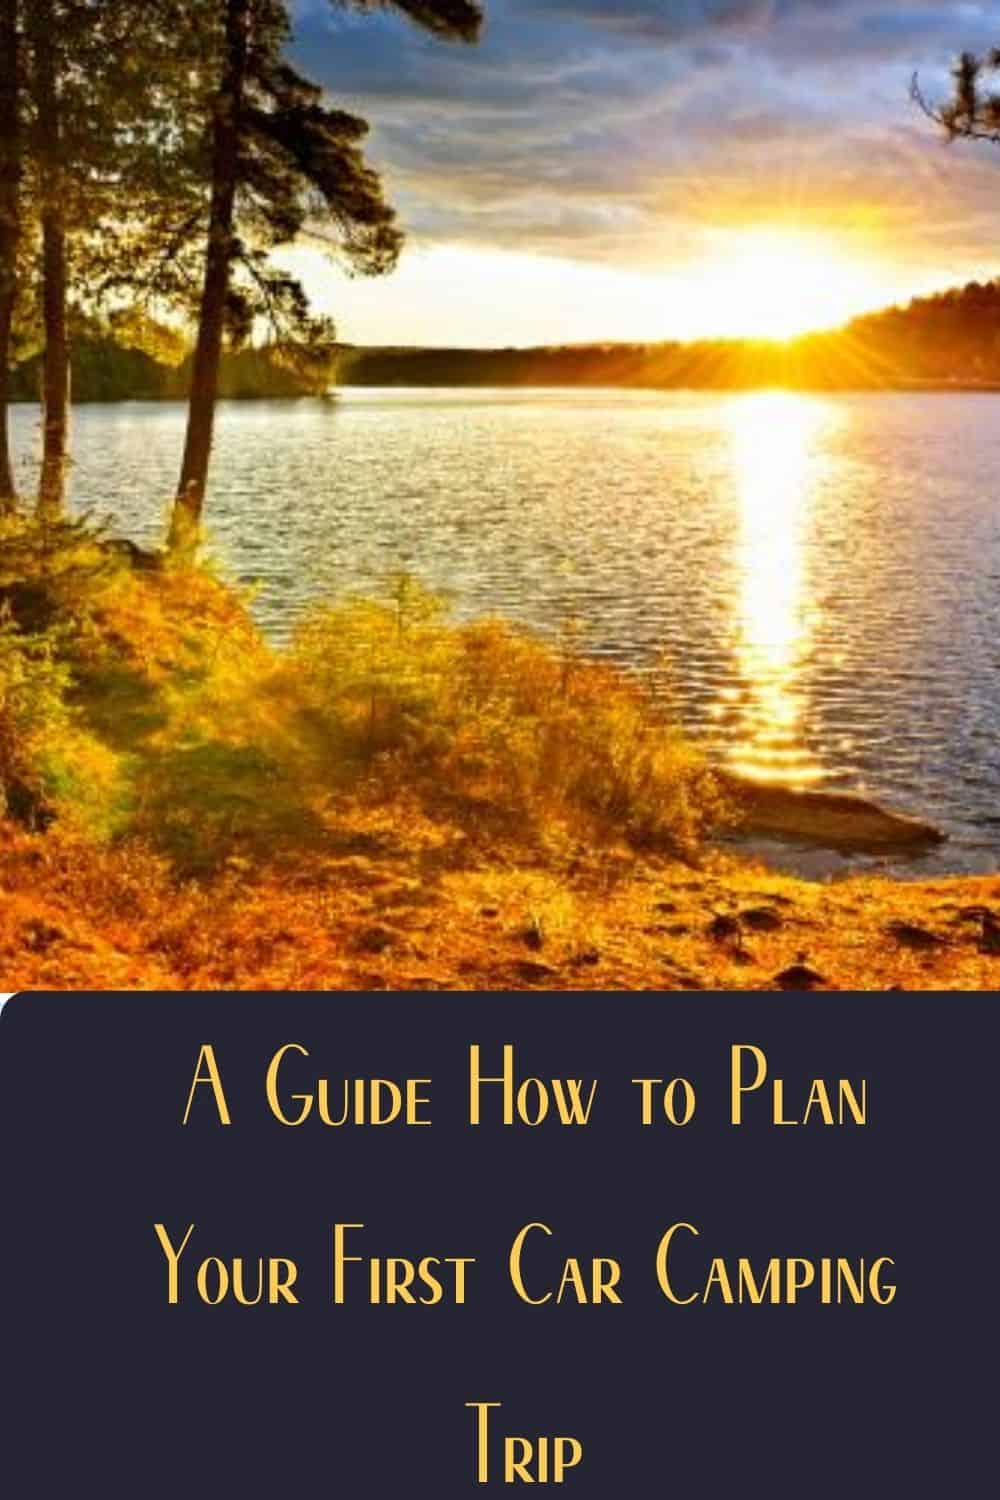 Pinterest image for A Guide How to Plan Your First Car Camping Trip